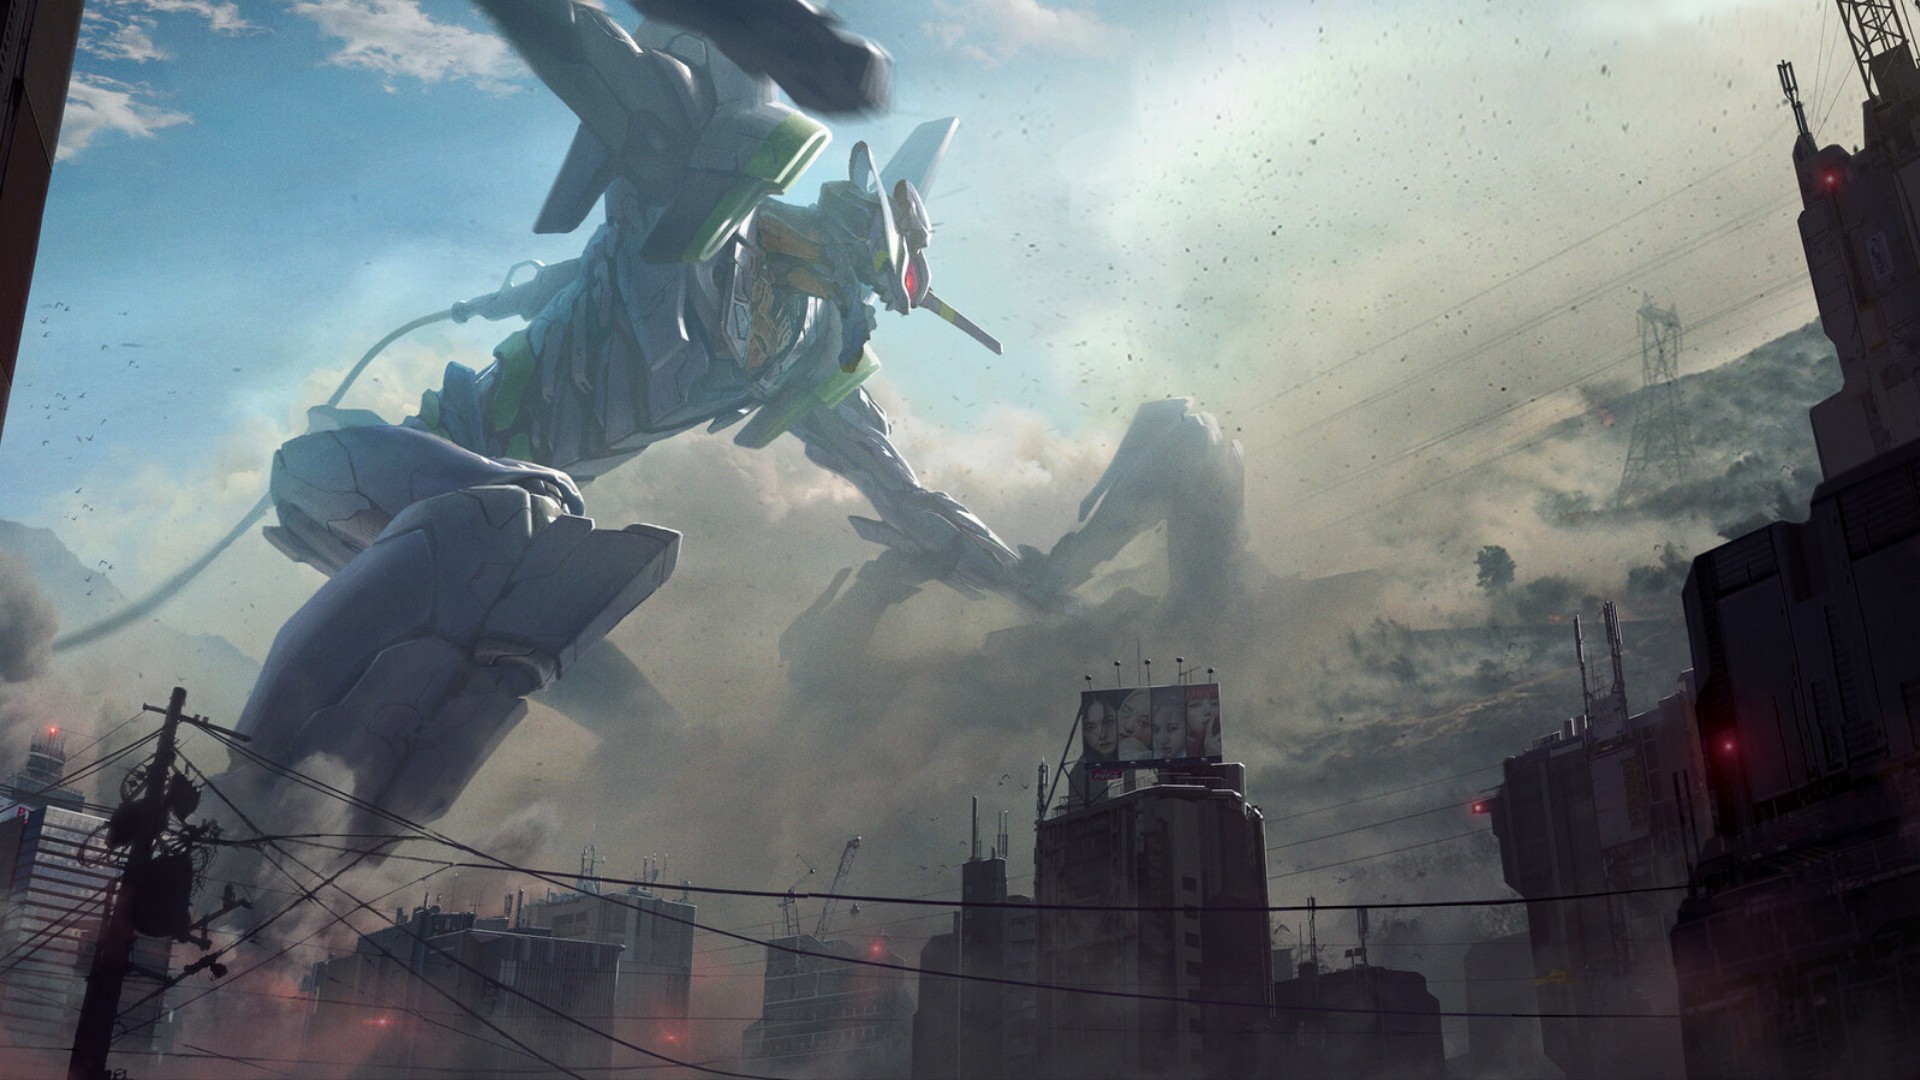 Anime Evangelion: 1.0 You Are (Not) Alone HD Wallpaper by JunNing Chen